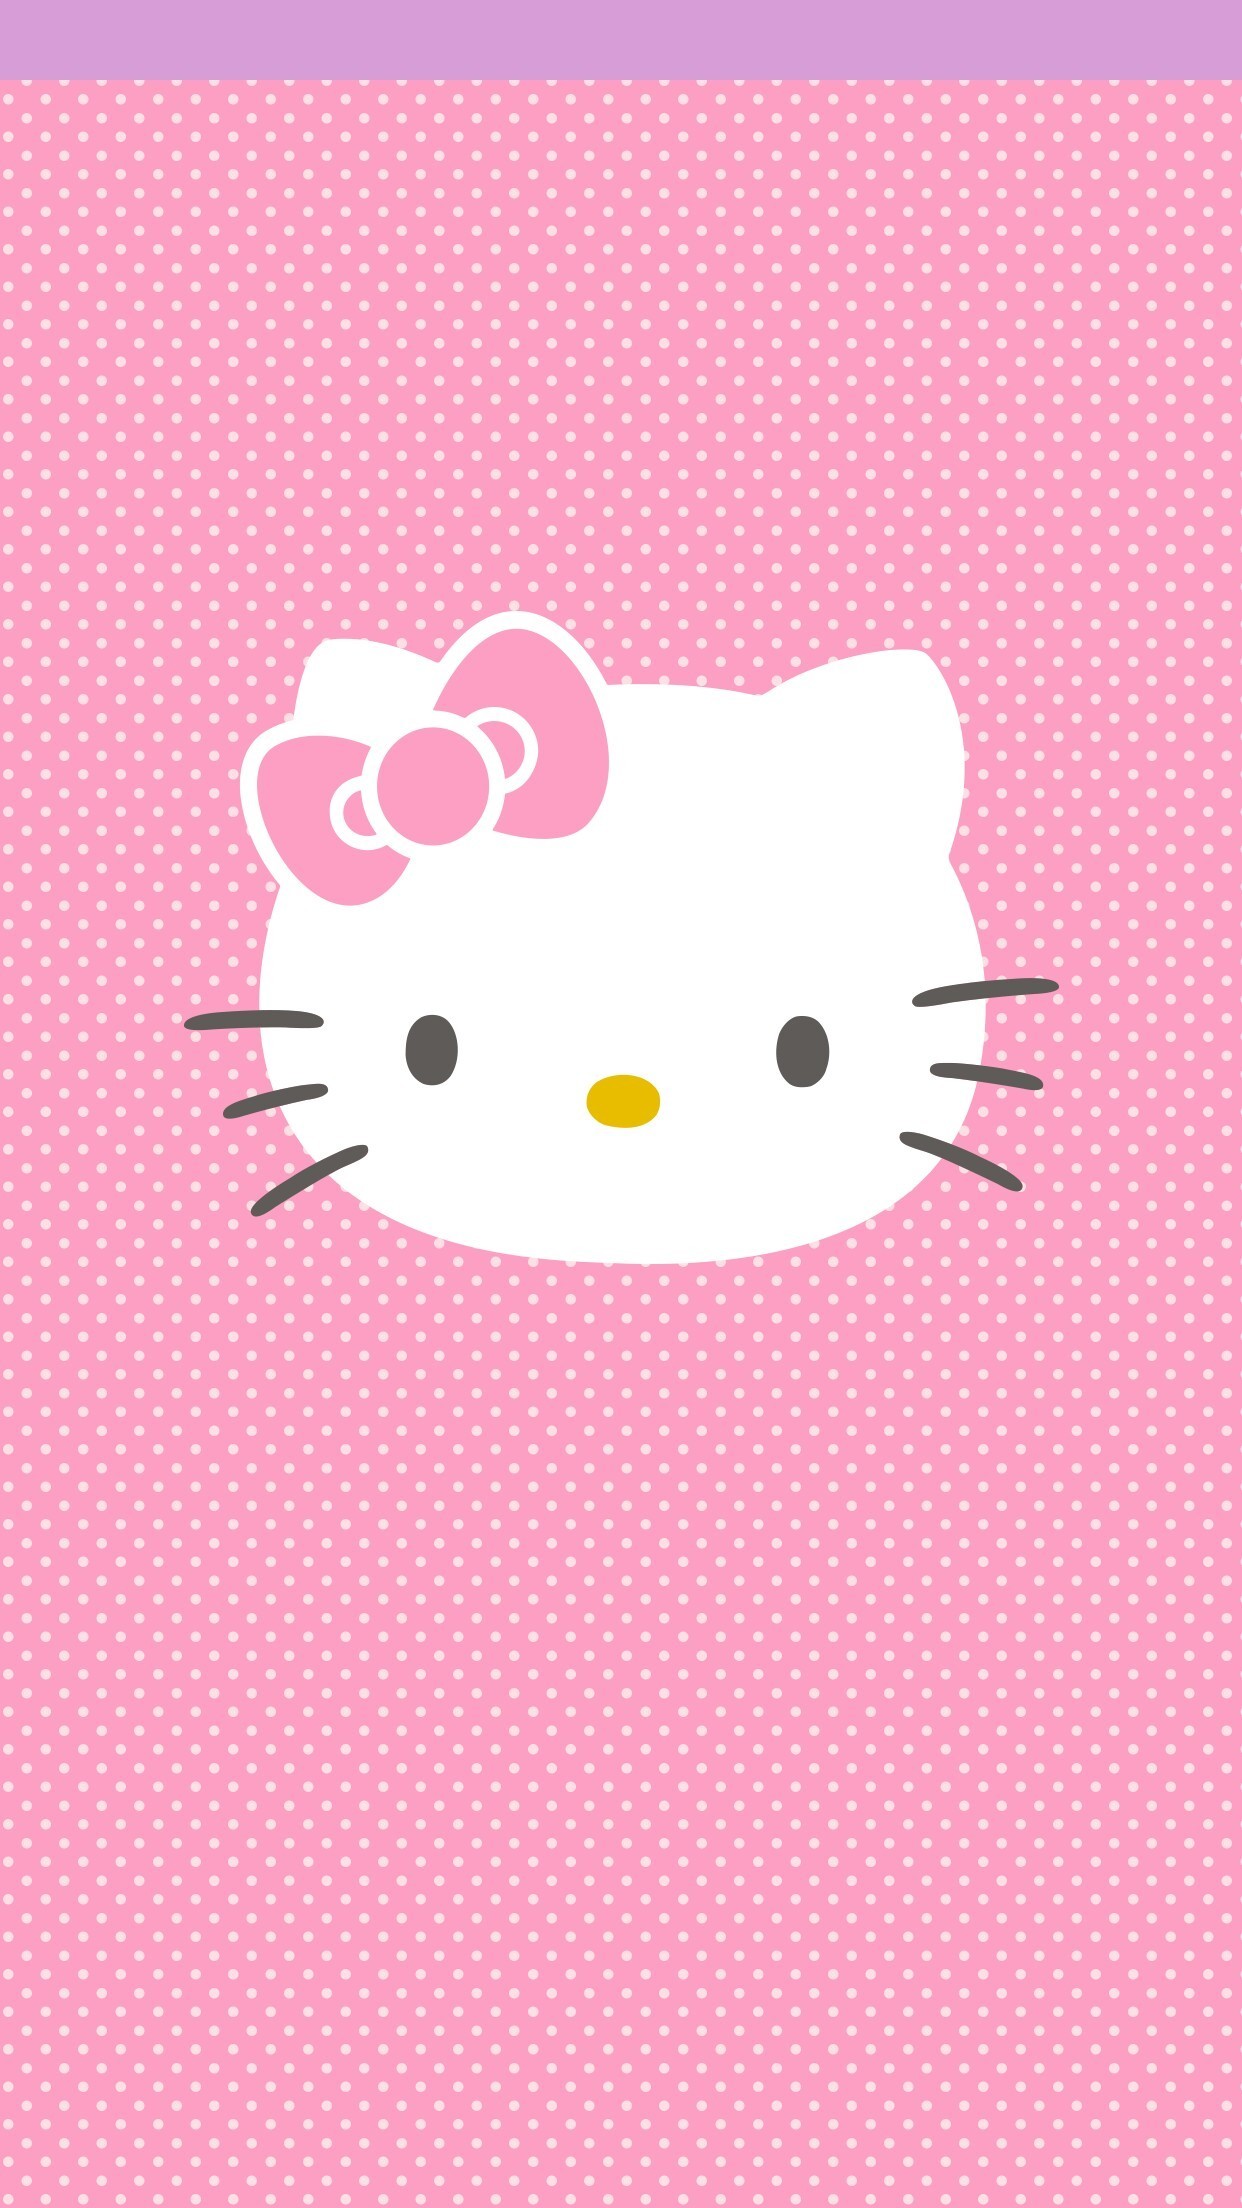 1242x2208 Cute Hello Kitty Wallpapers For iPhone 17498 640x1136 px